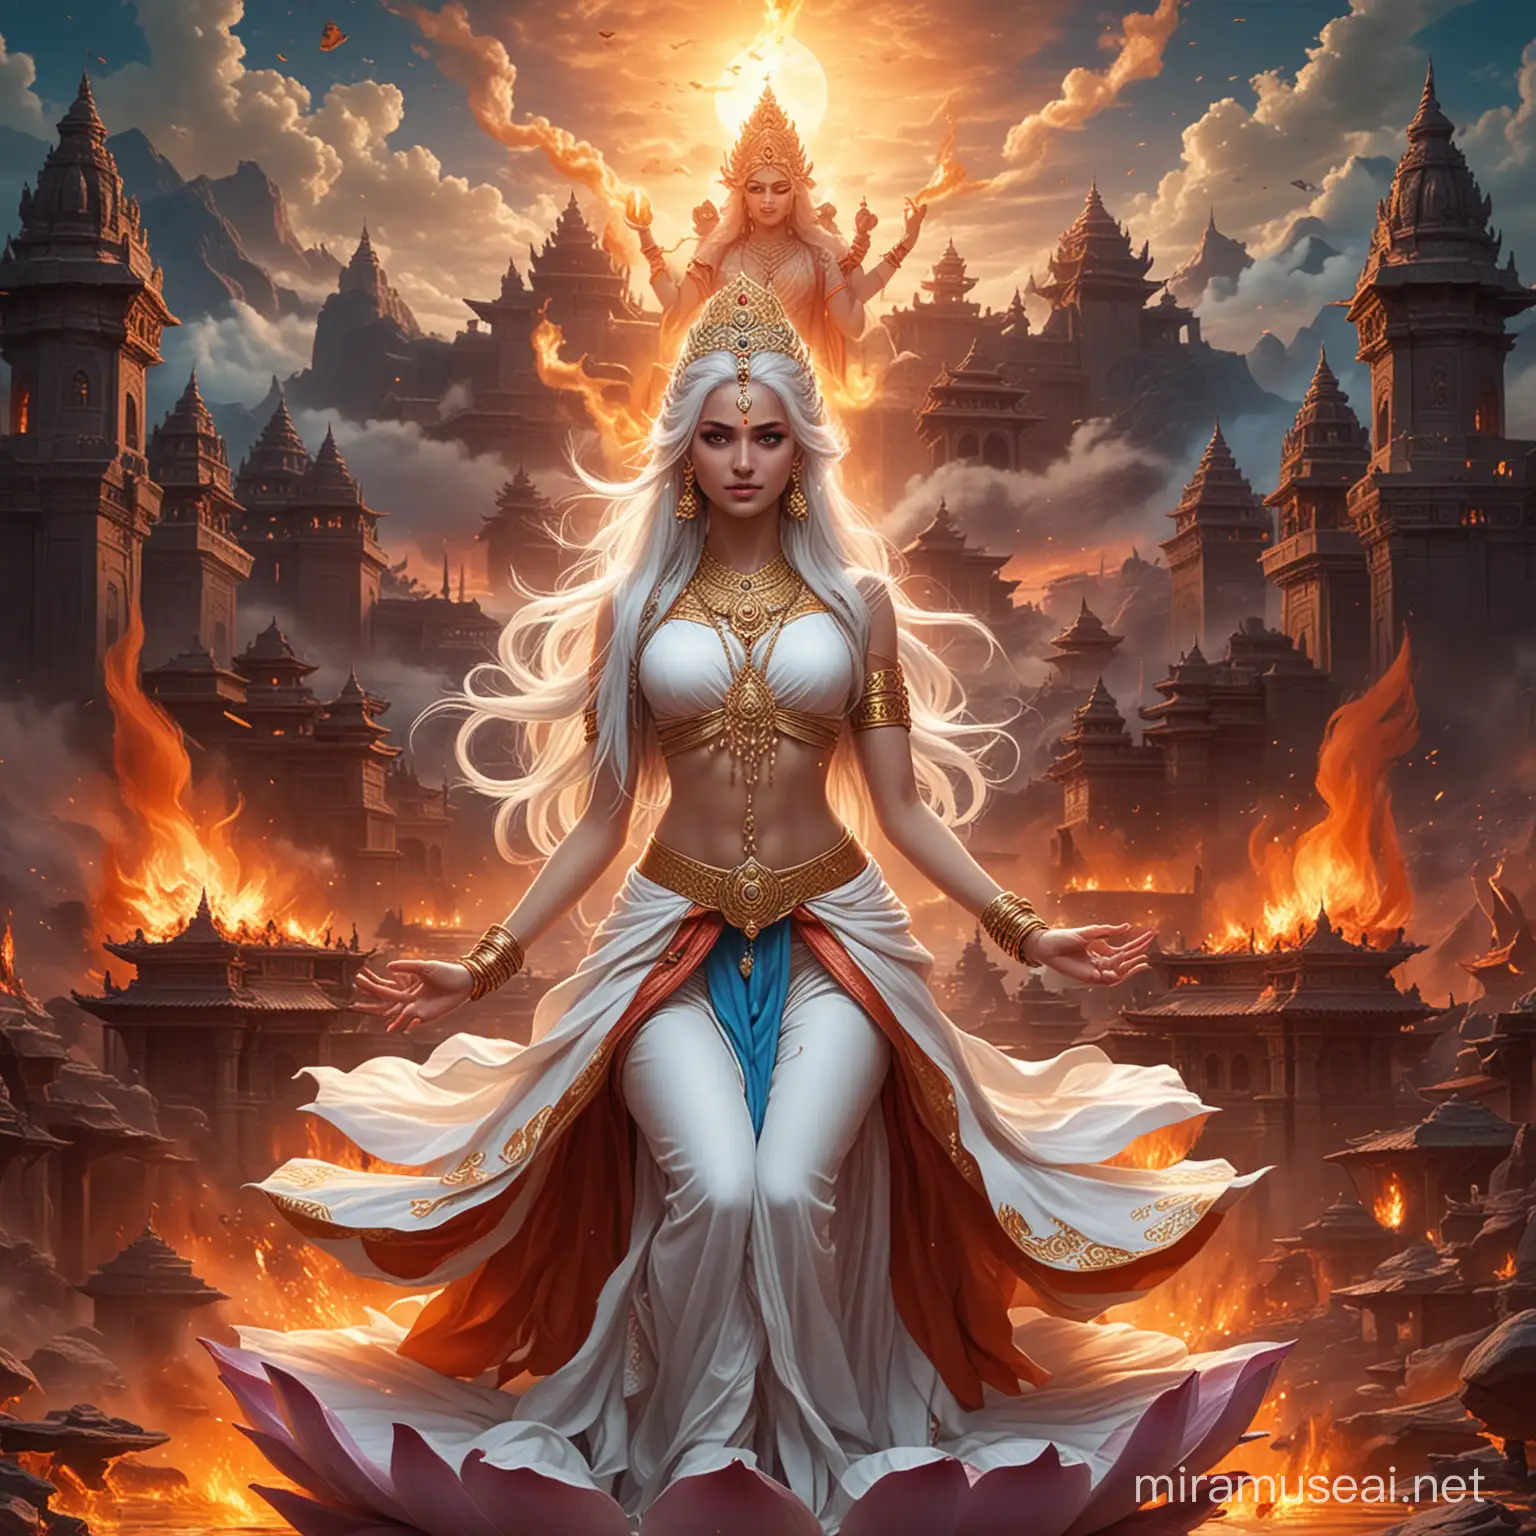 WhiteHaired Hindu Empress in Combat Amidst Fiery Surroundings